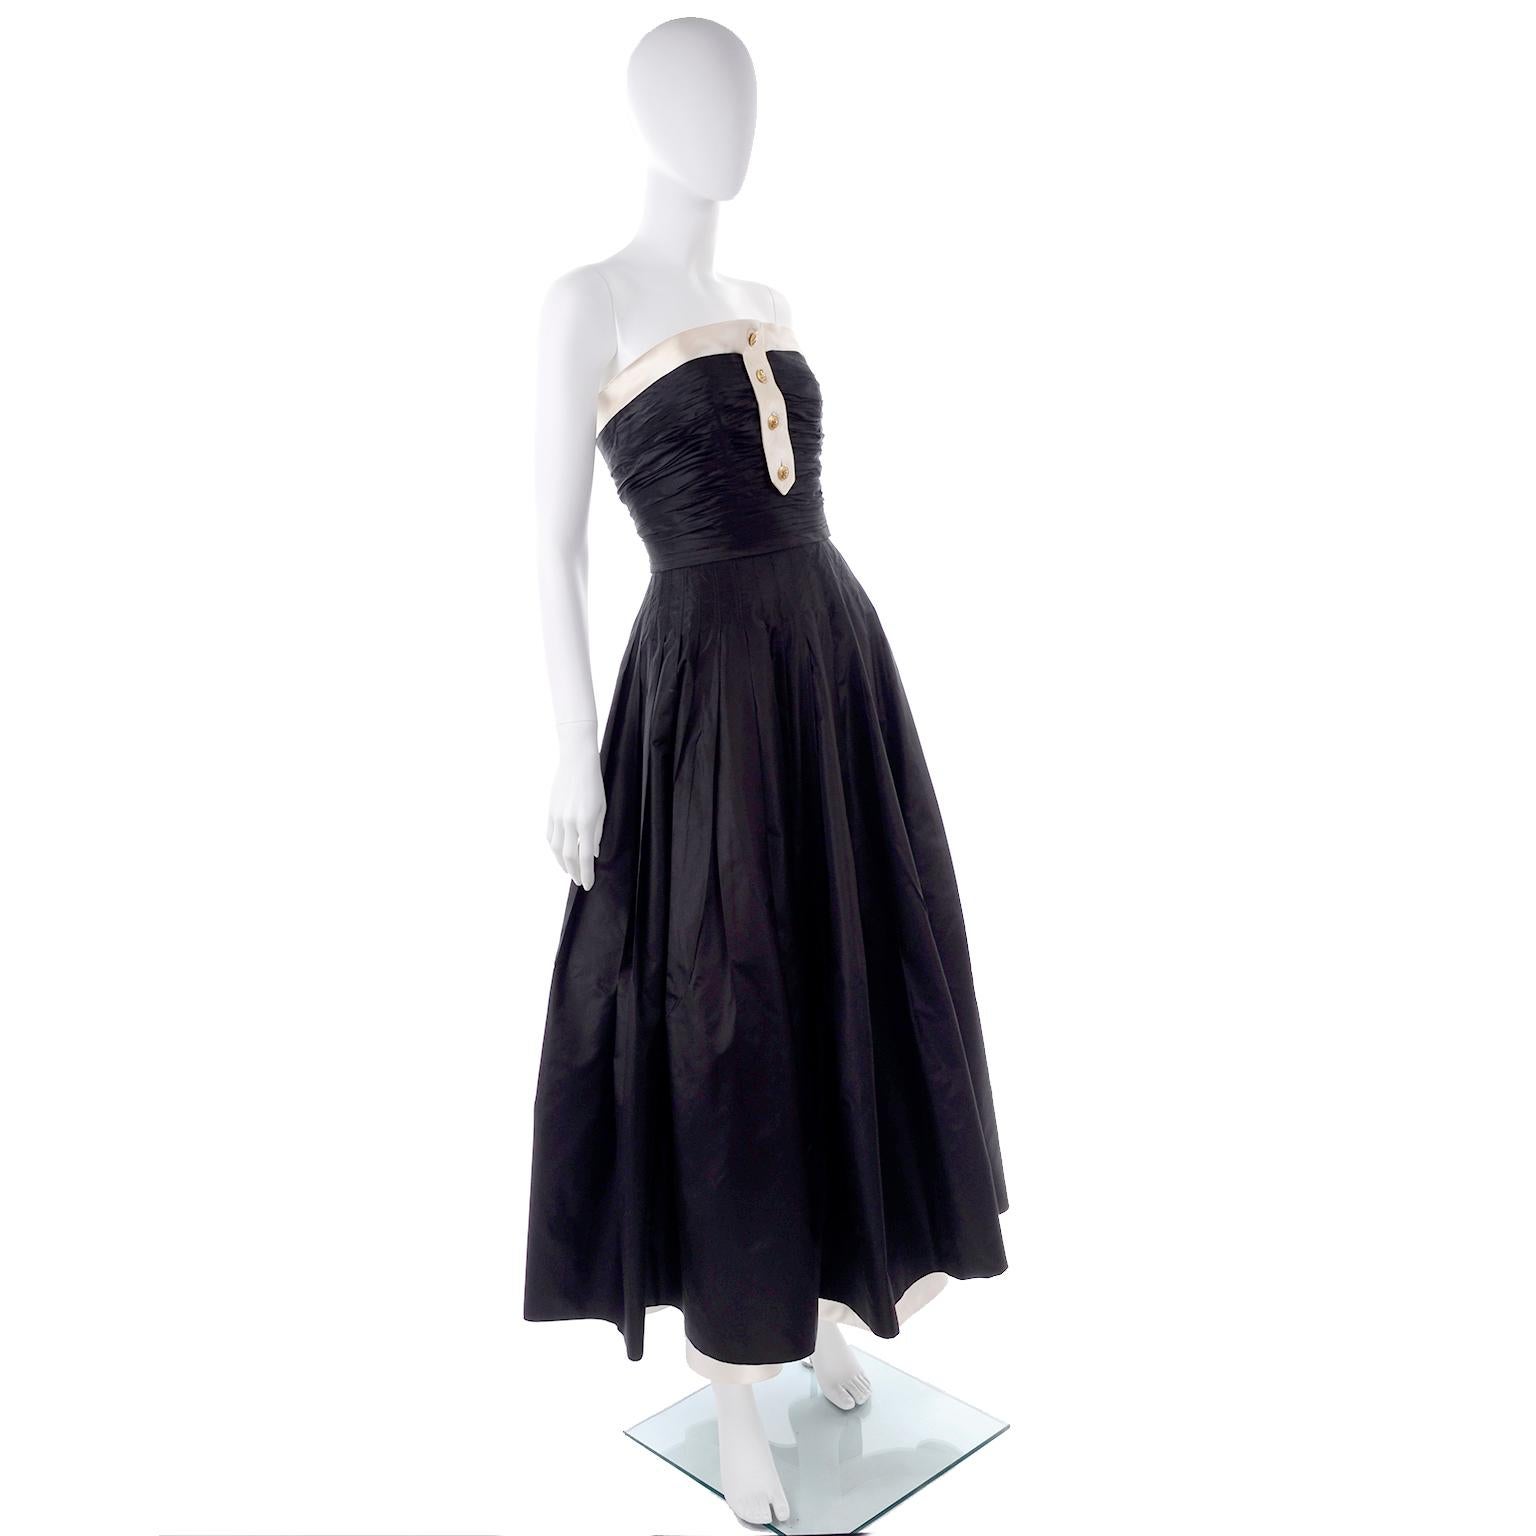 This is a beautiful Chanel 1990's Black and ivory full length dress that pays tribute to the tuxedo. This strapless evening dress is in a black silk taffeta with ivory silk trim and it has gold monogram cc buttons down the front. We particularly